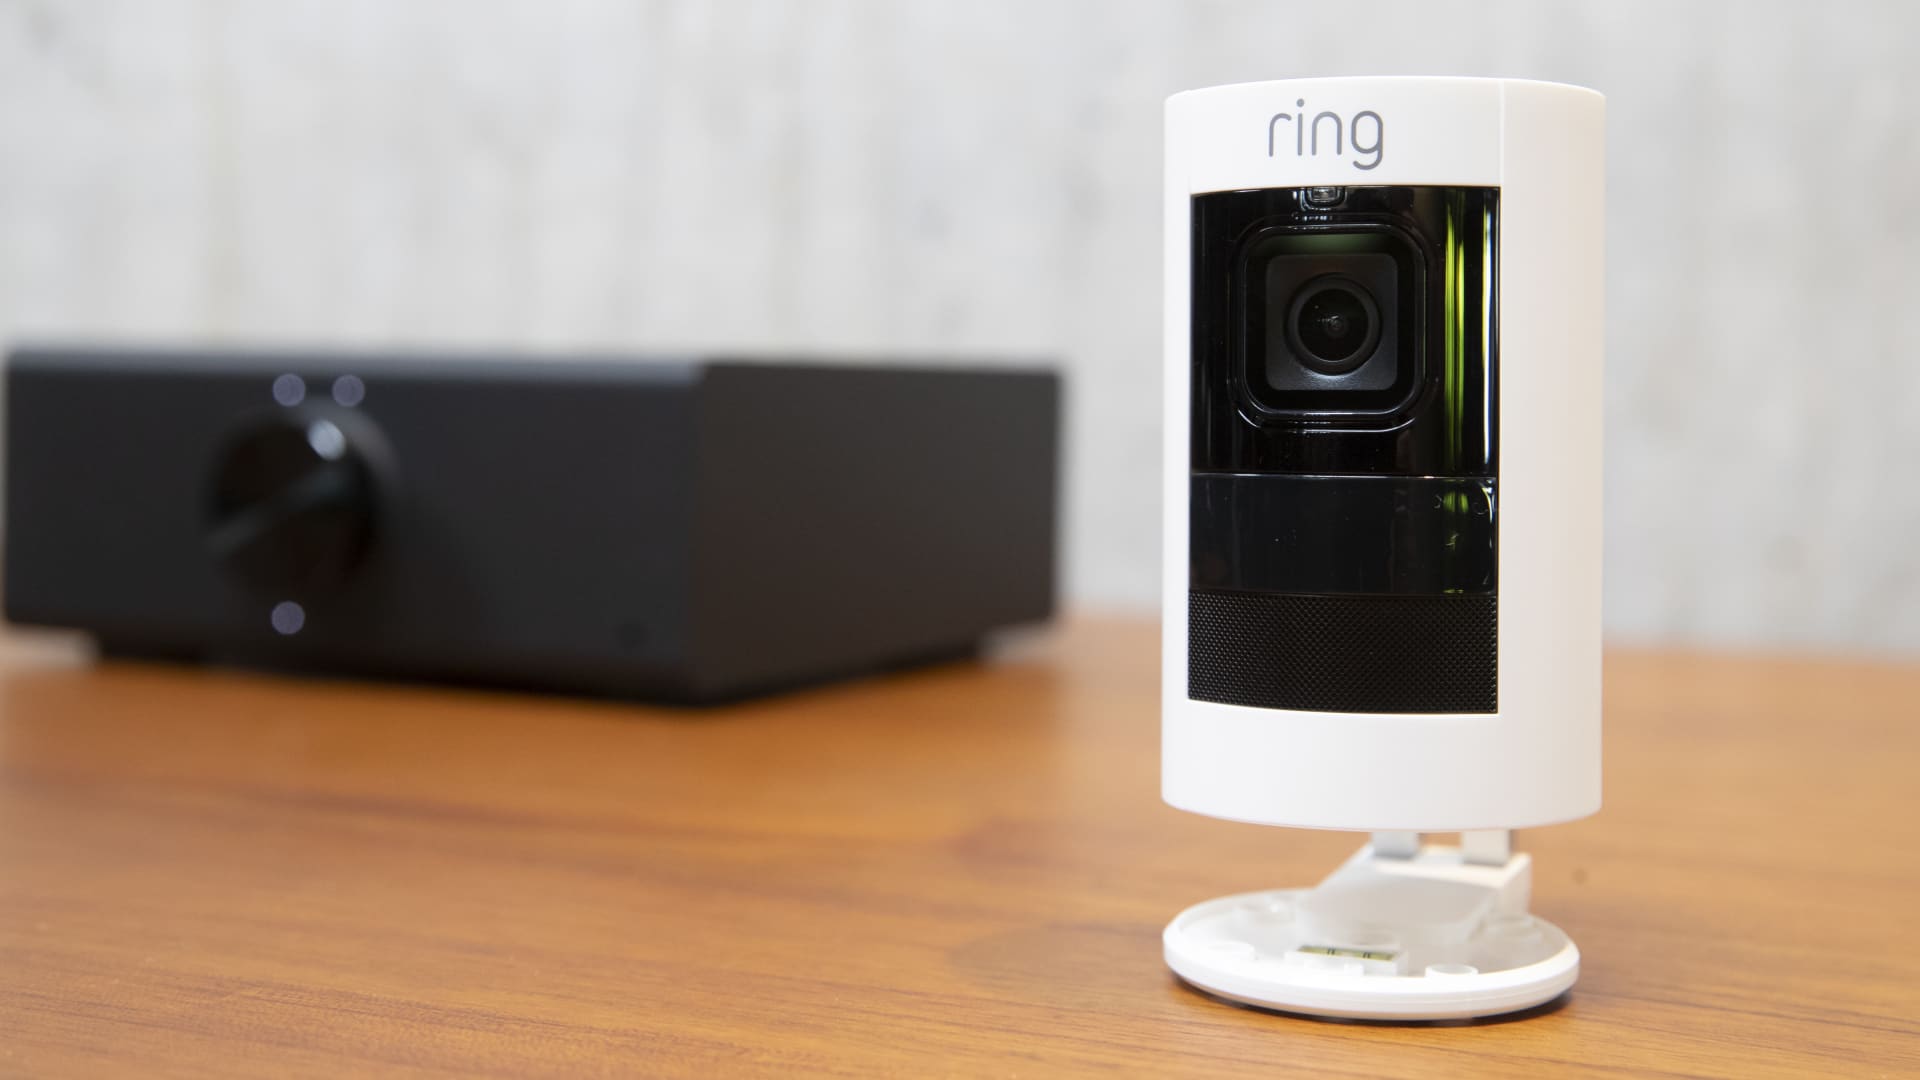 Amazon's Ring will stop allowing police to request doorbell video footage from users